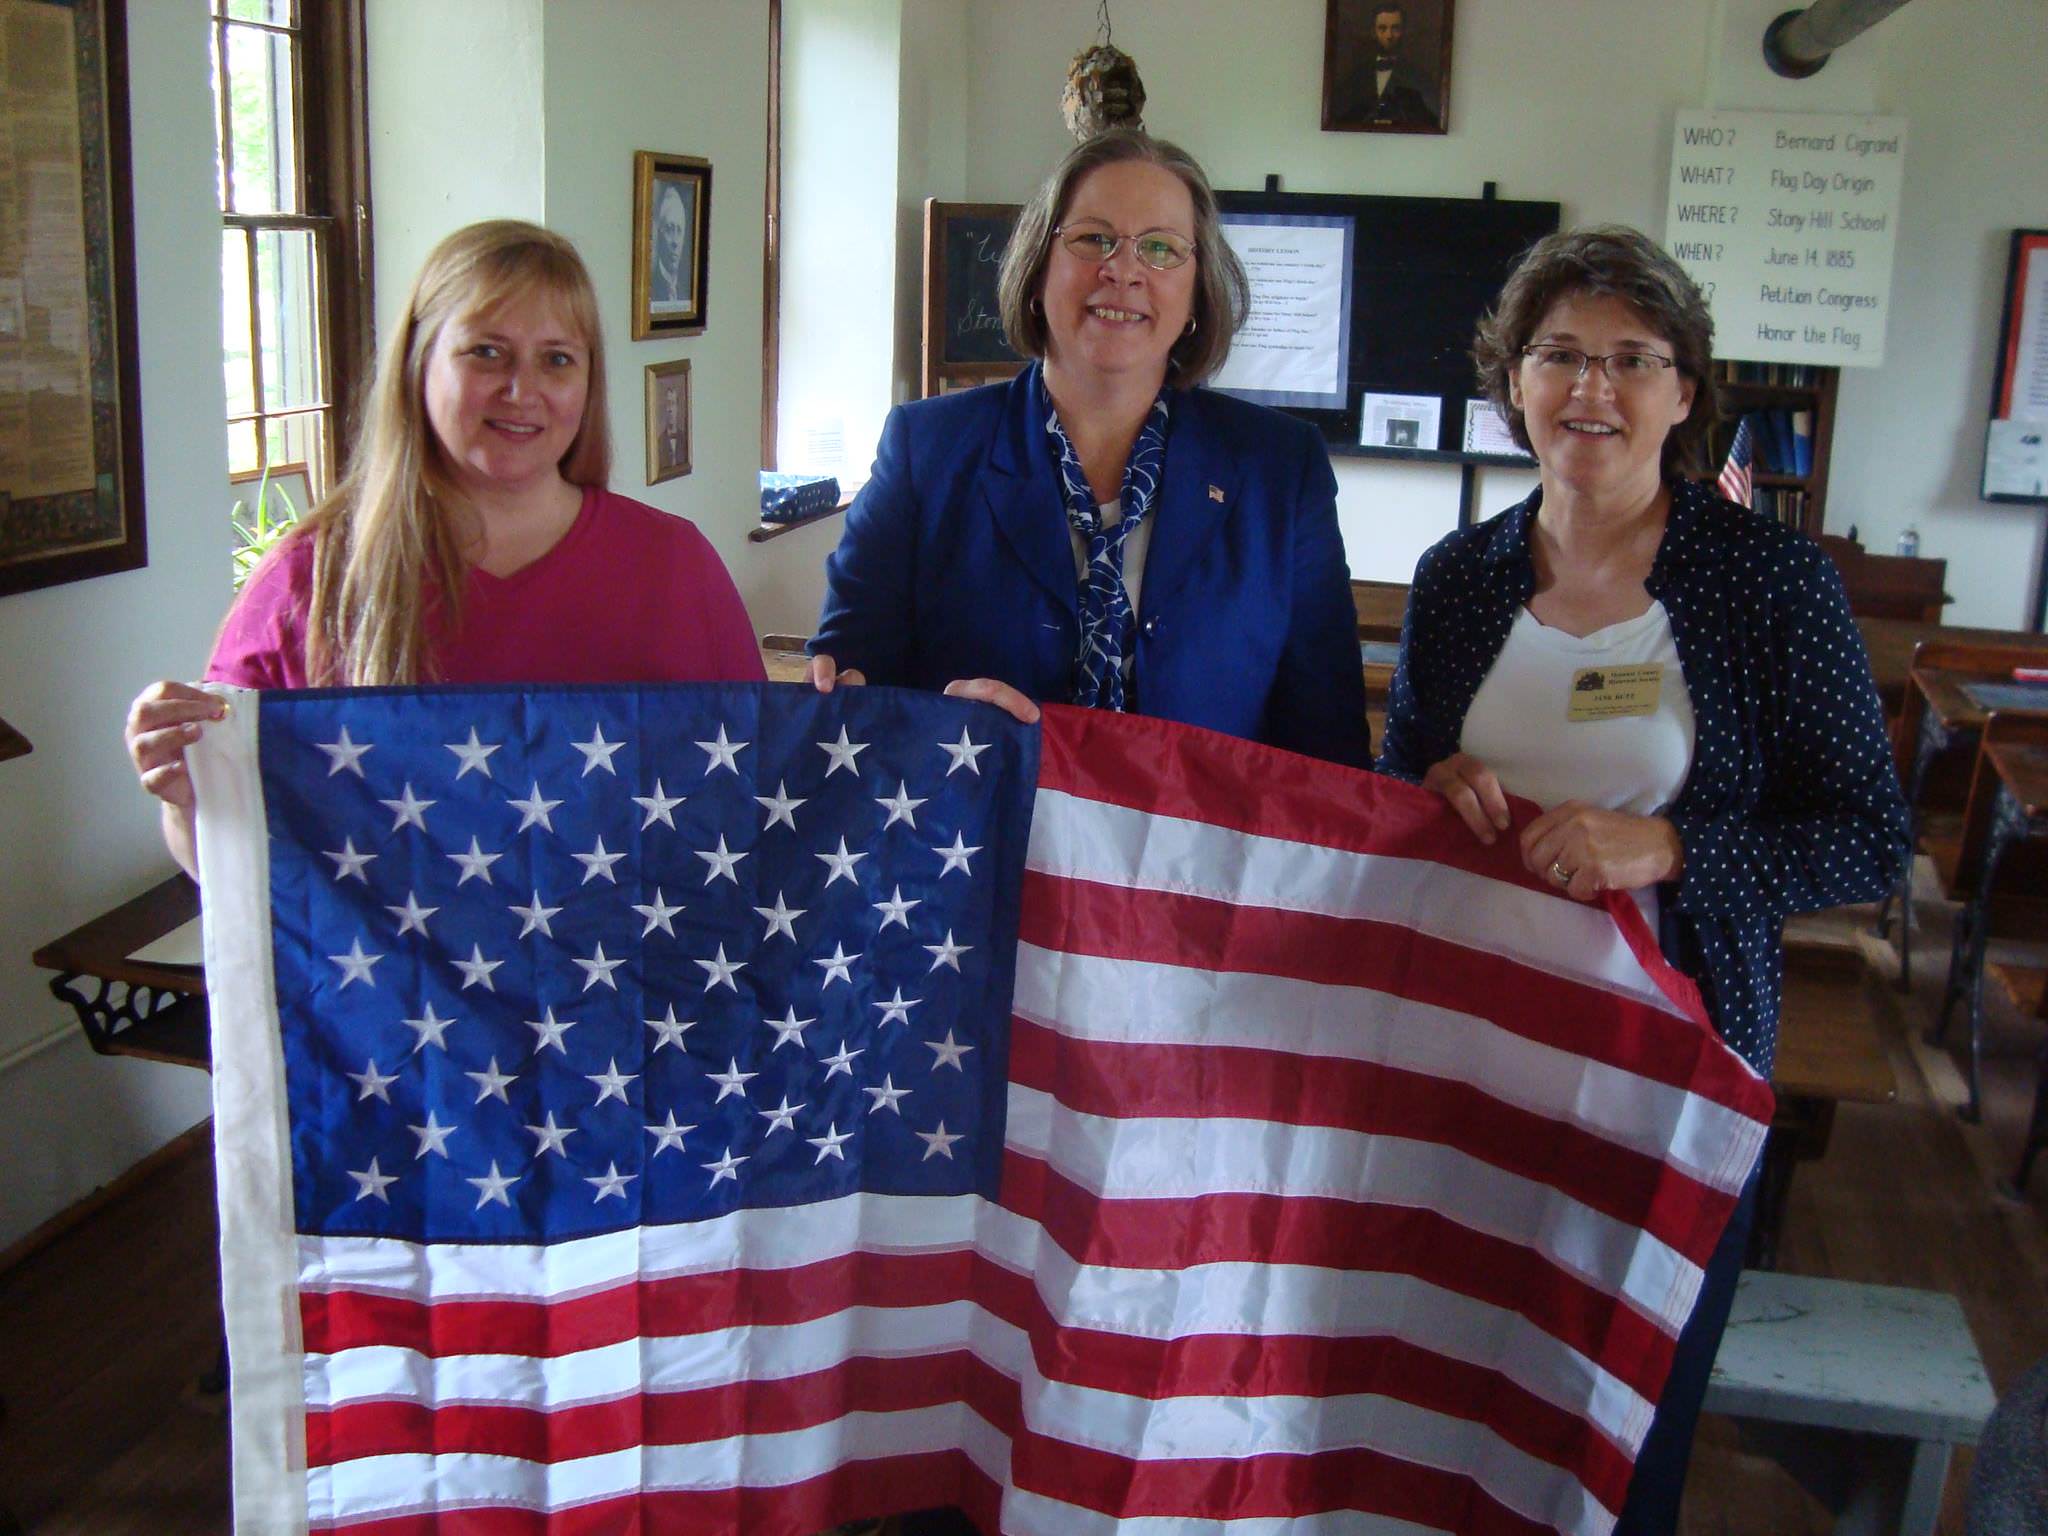 Moline filmmaker Tammy Rundle, left, with two organizers of a Flag Day ceremony in Wisconsin in 2009.